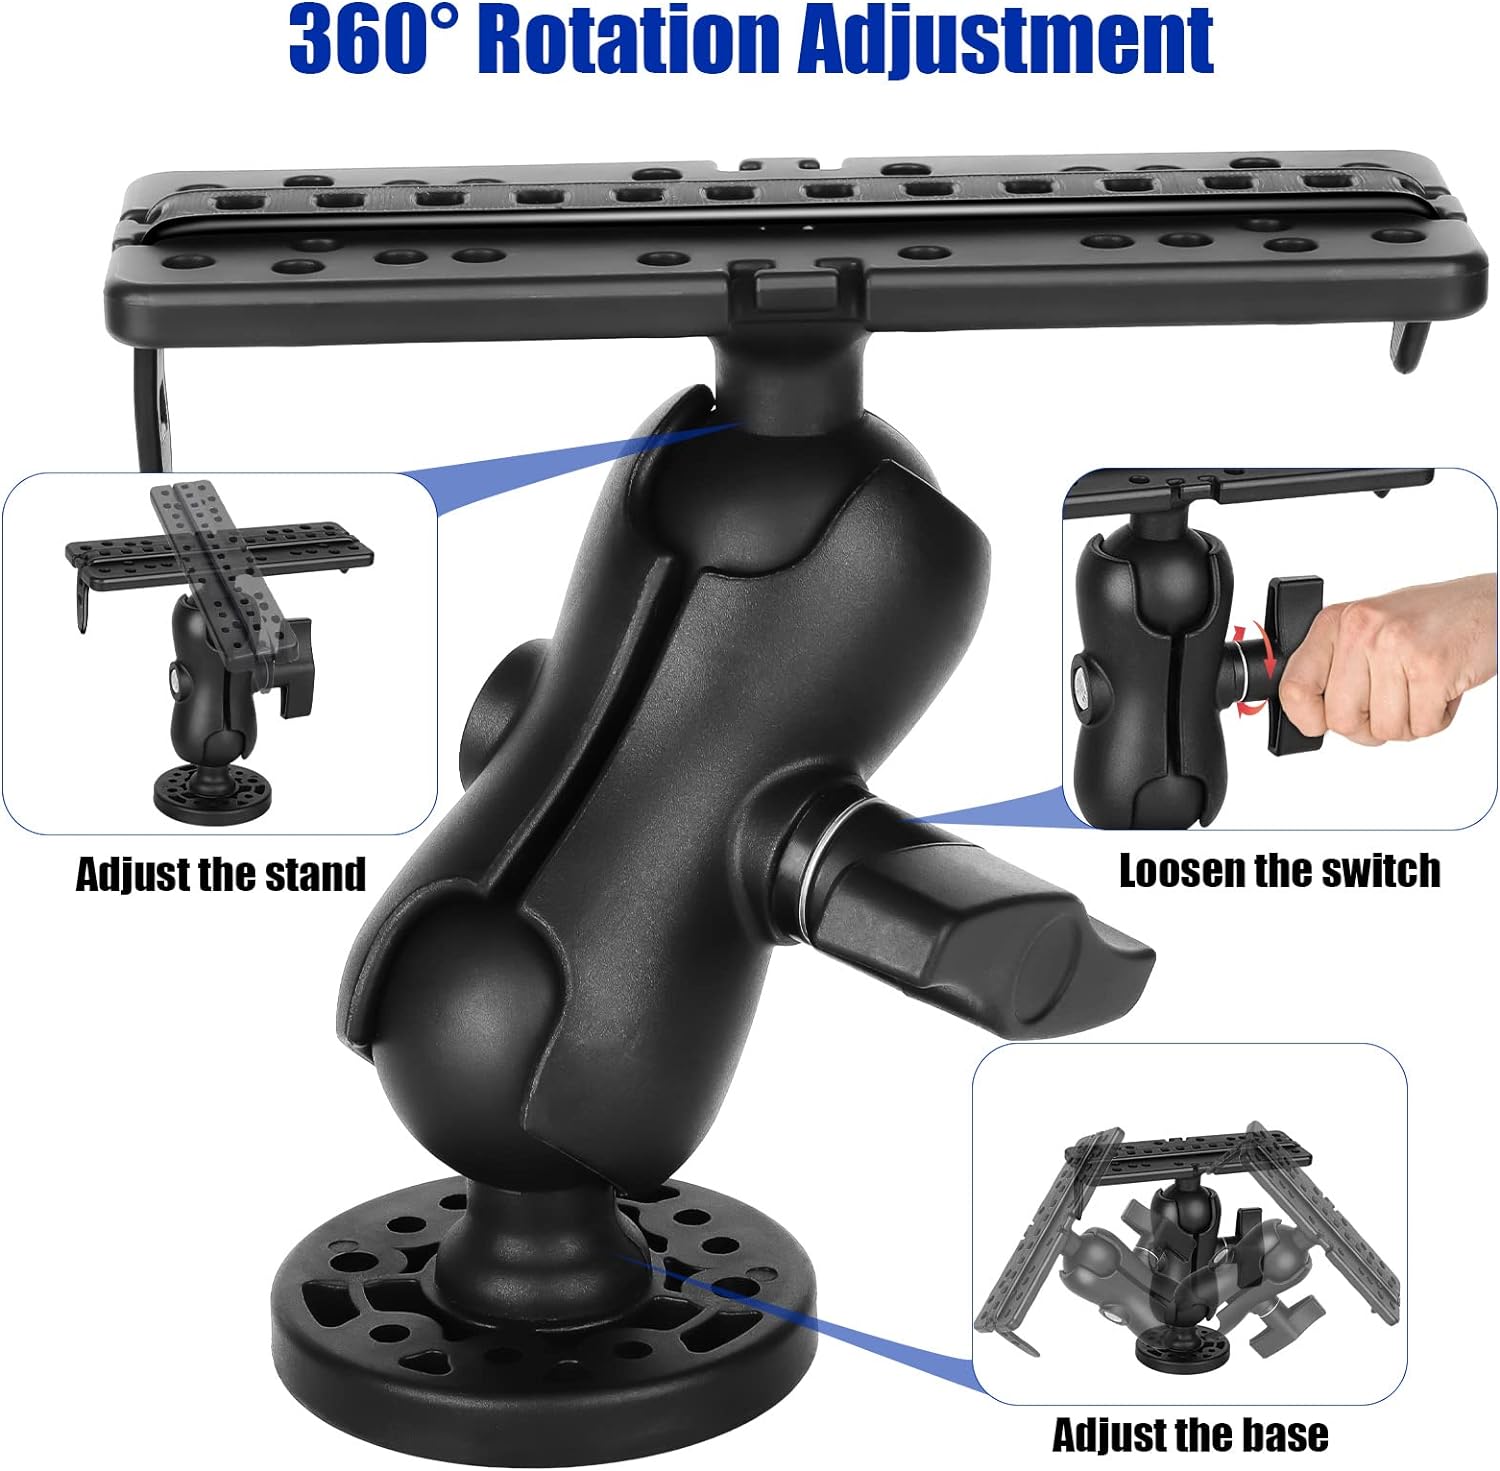 Fish Finder Mount Base, Marine Electronic Fish Finder Mount, Ball-Mount Fish Finder Bracket, 360° Rotation Fish Finder Holder, Universal Kayak Mounting Plate, Fish Finder Accessories for Boat Yacht - Fish Finder Mount Base Review